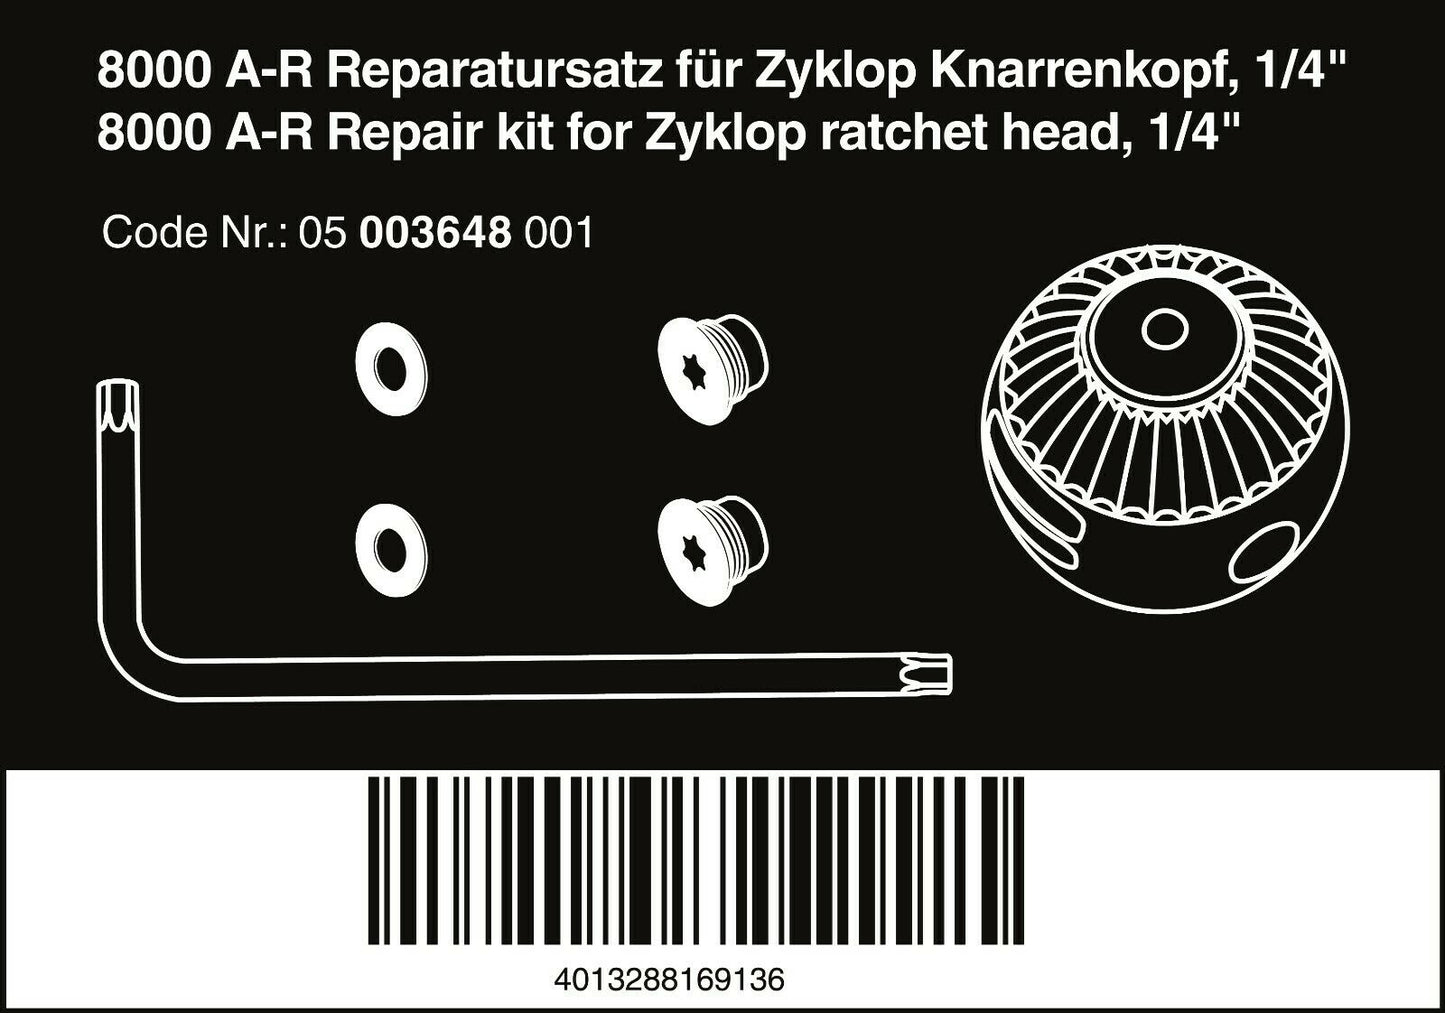 wera 8000 a-r zyklop socket wrench repair kit 1/4" 05003648001